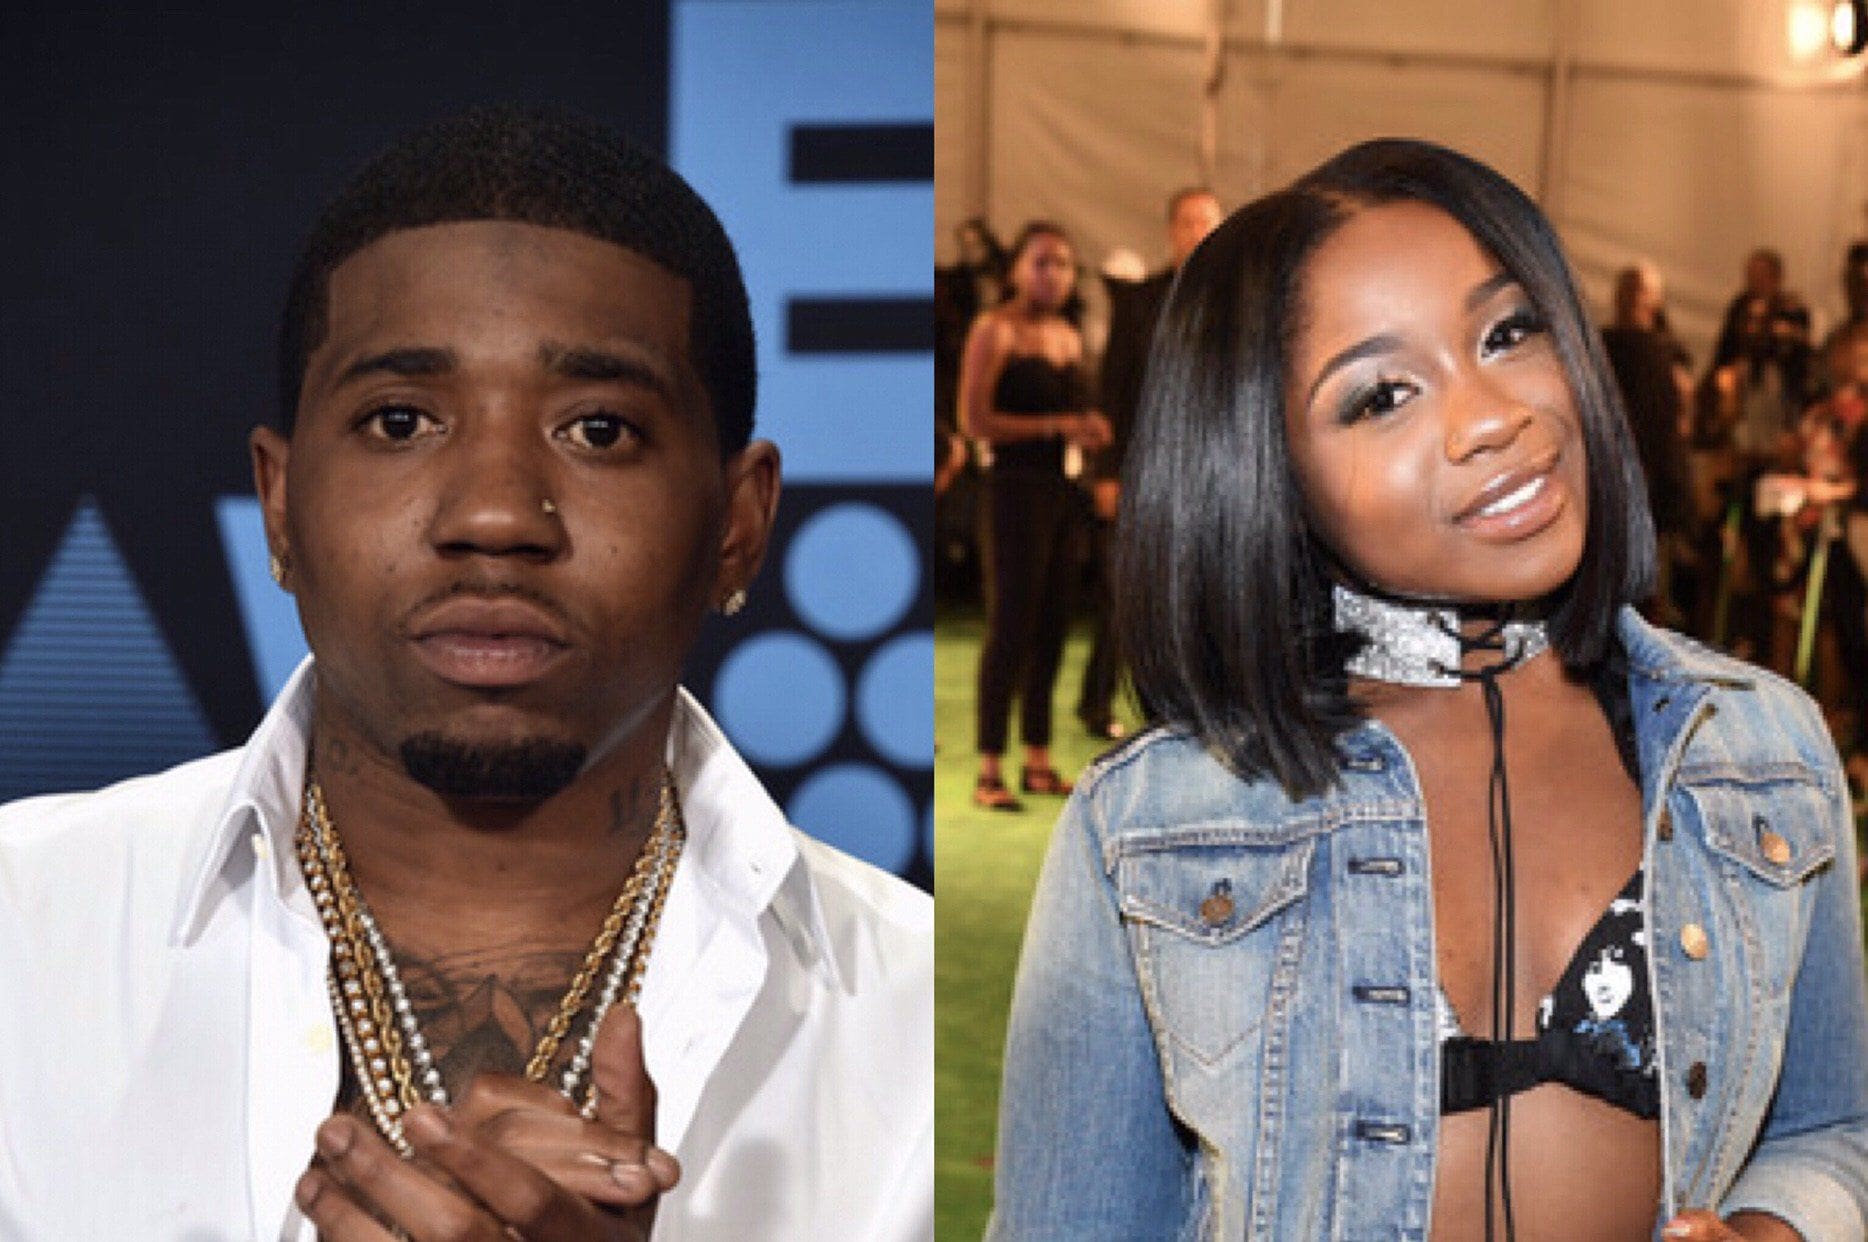 Lil Wayne's Daughter Reginae Carter Shows Off Scandalous Dancing Moves On YFN Lucci's Music And Fans Are Freaking Out